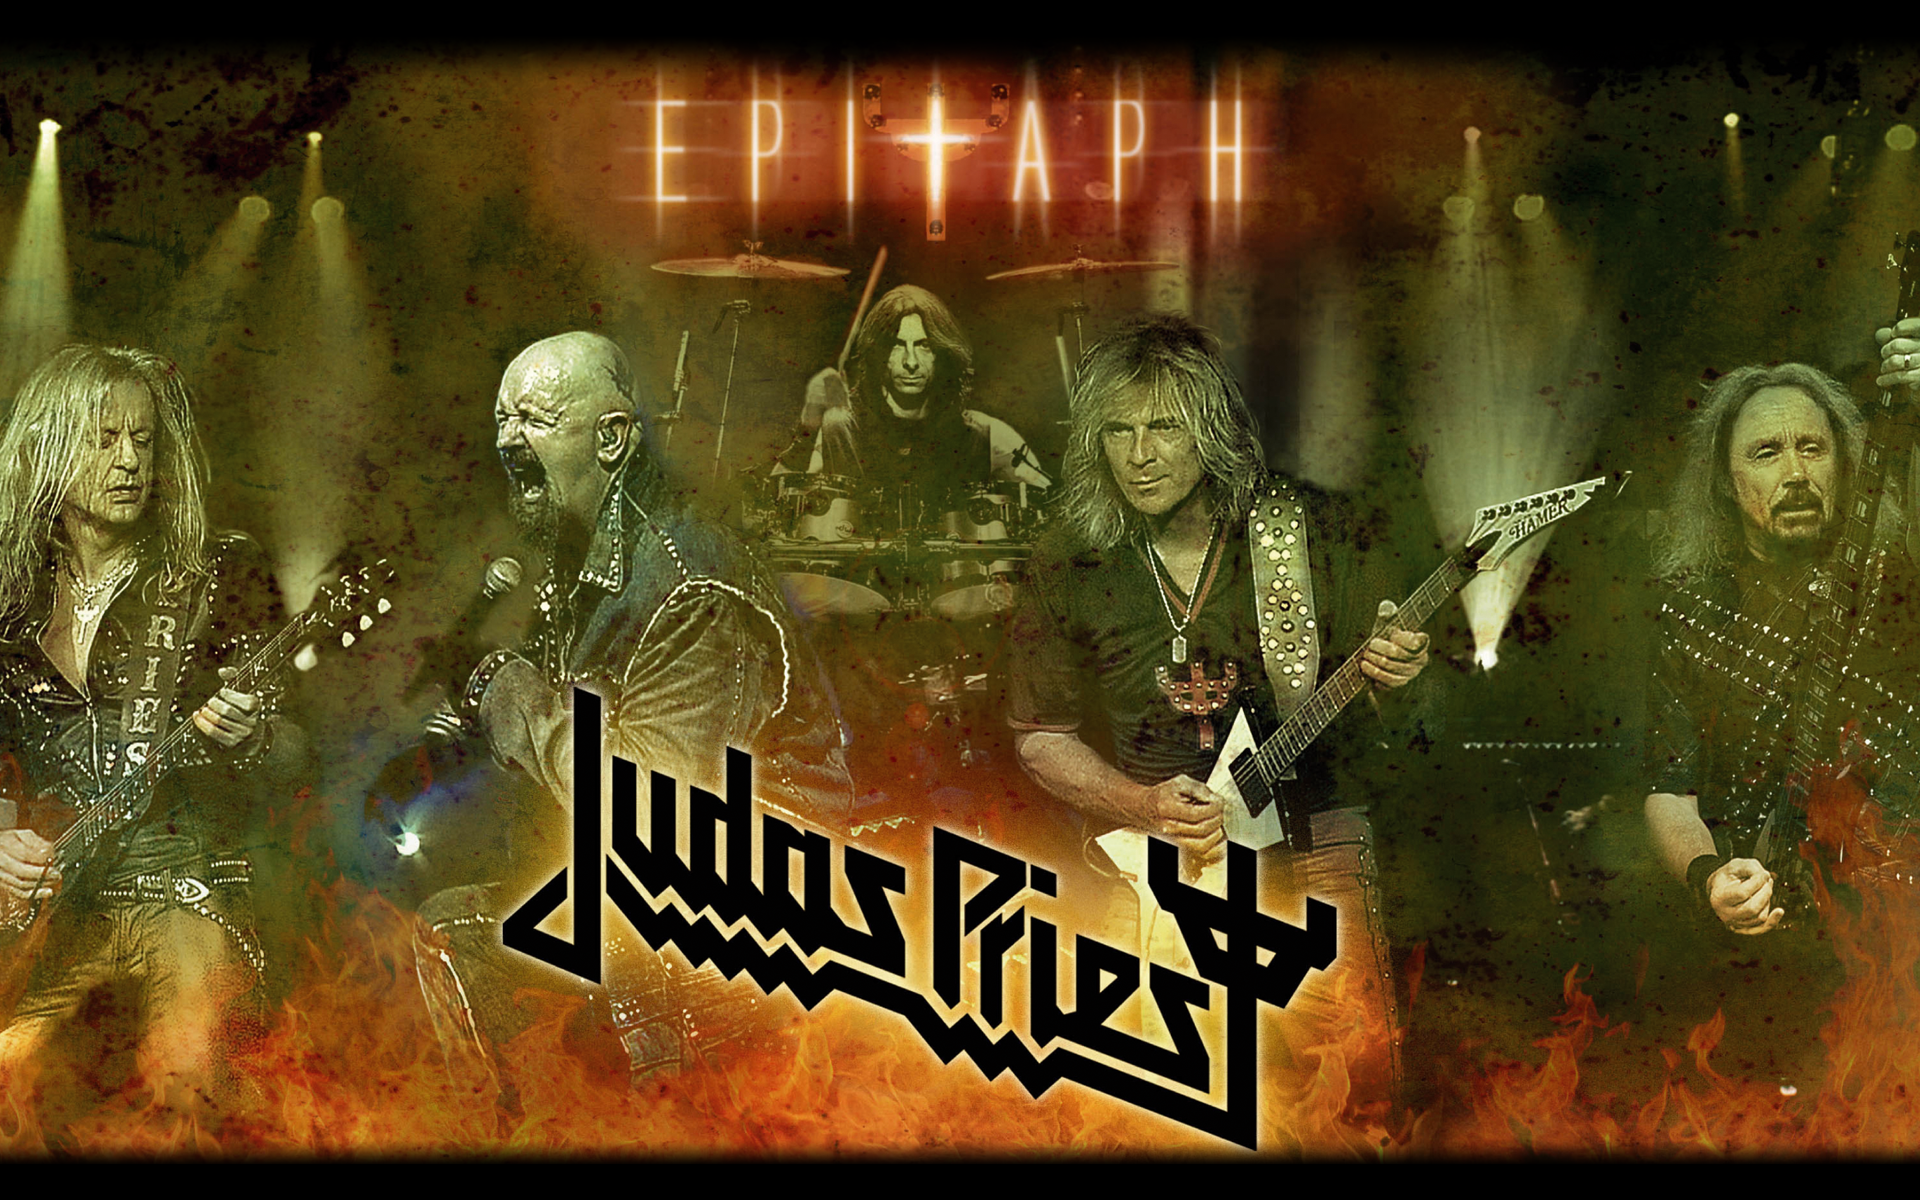 Judas Priest Heavy Metal Groups Bands Entertainment Music Hard Rock Album Covers Wallpapers Hd Desktop And Mobile Backgrounds